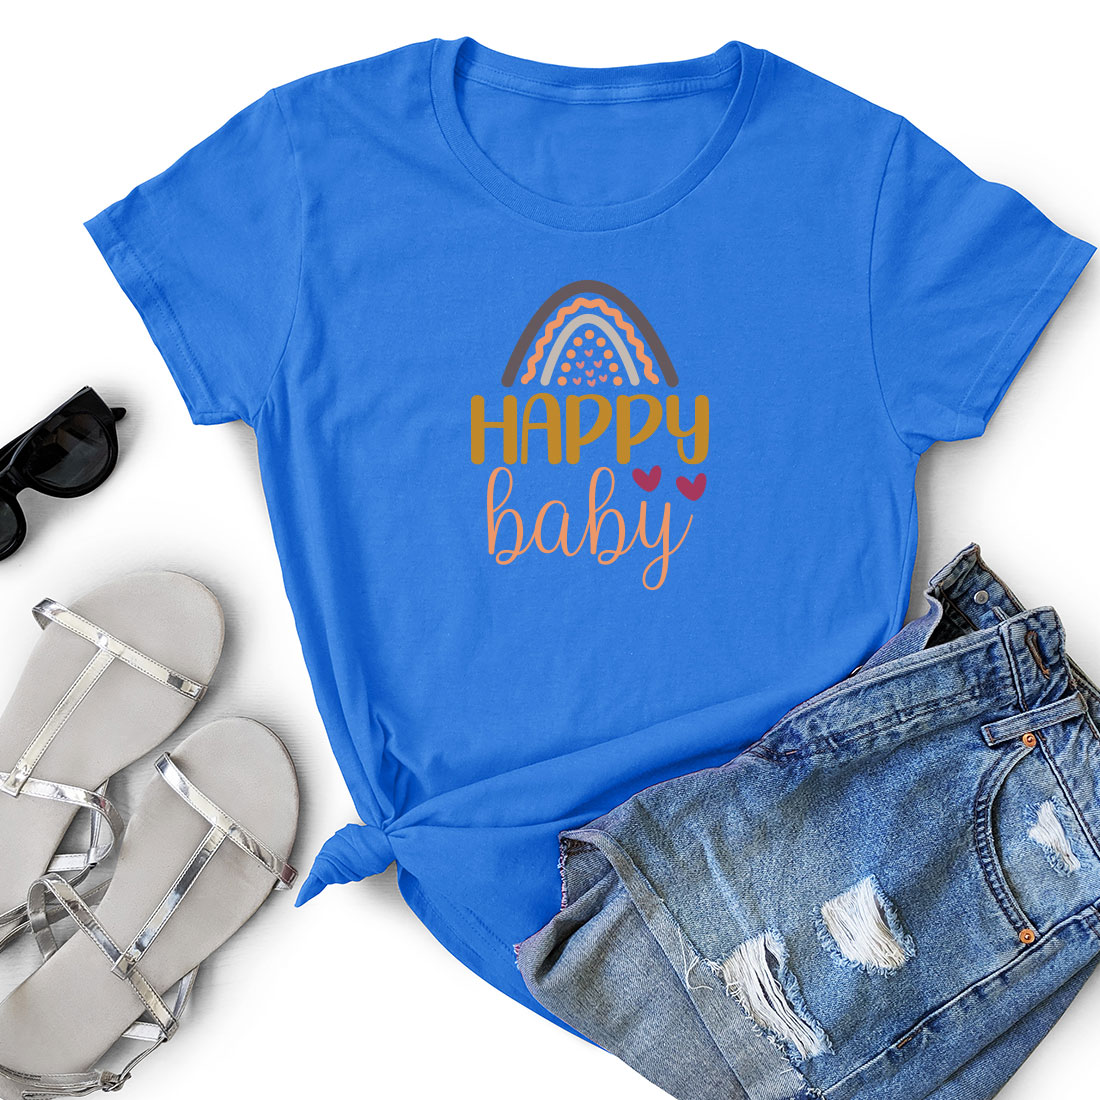 T - shirt that says happy baby next to a pair of shorts.